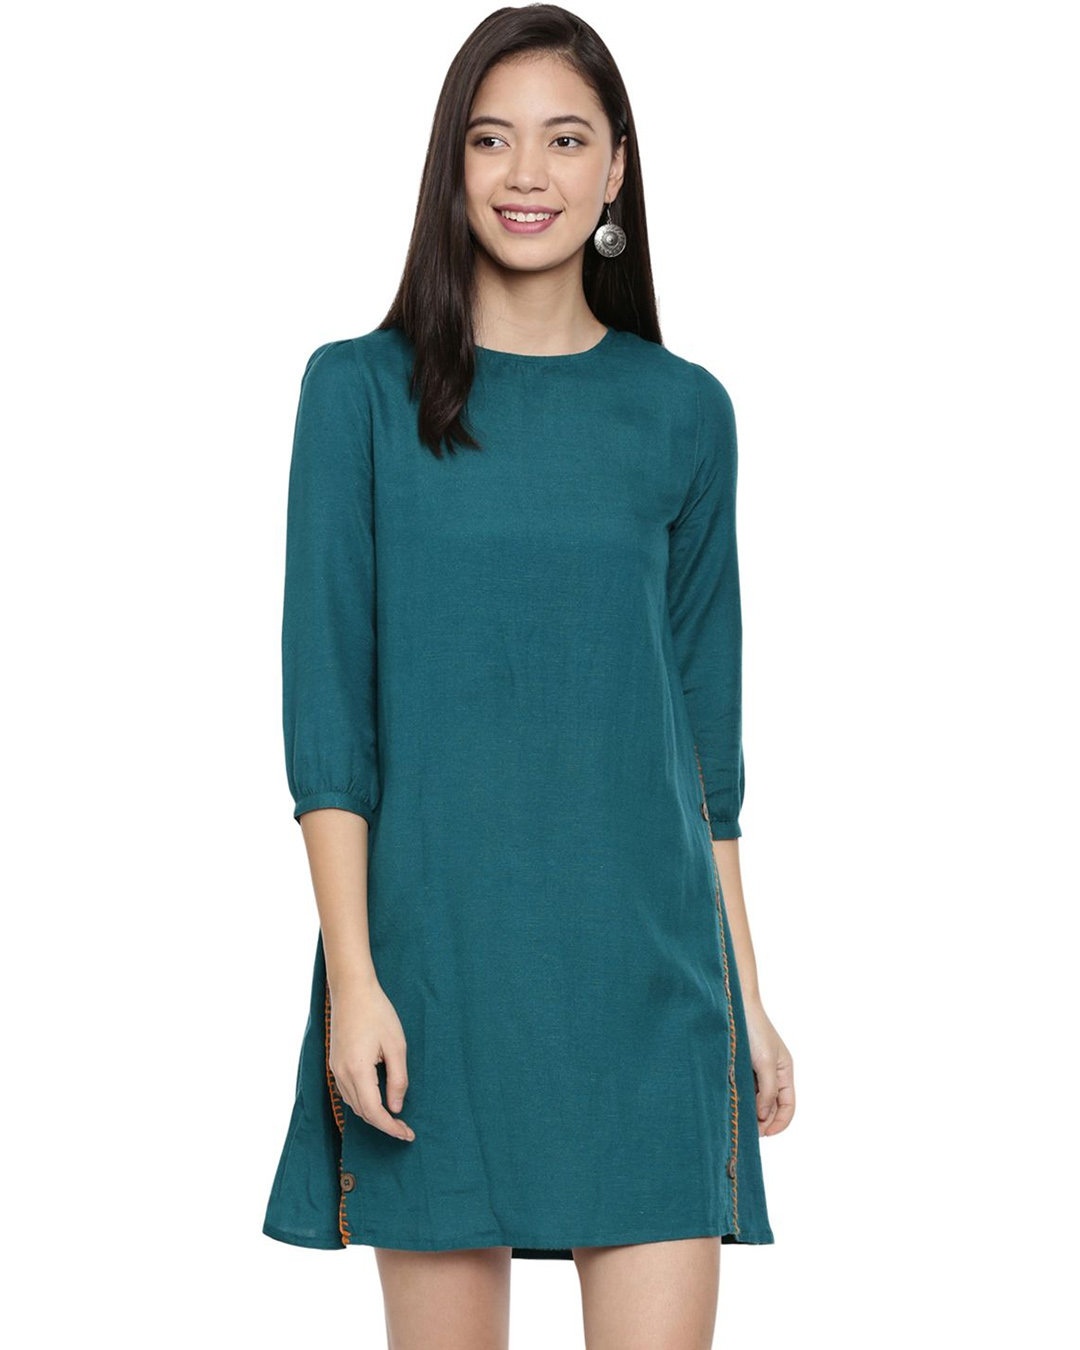 Shop All About Her Dark Teal Shift Dress For Women's